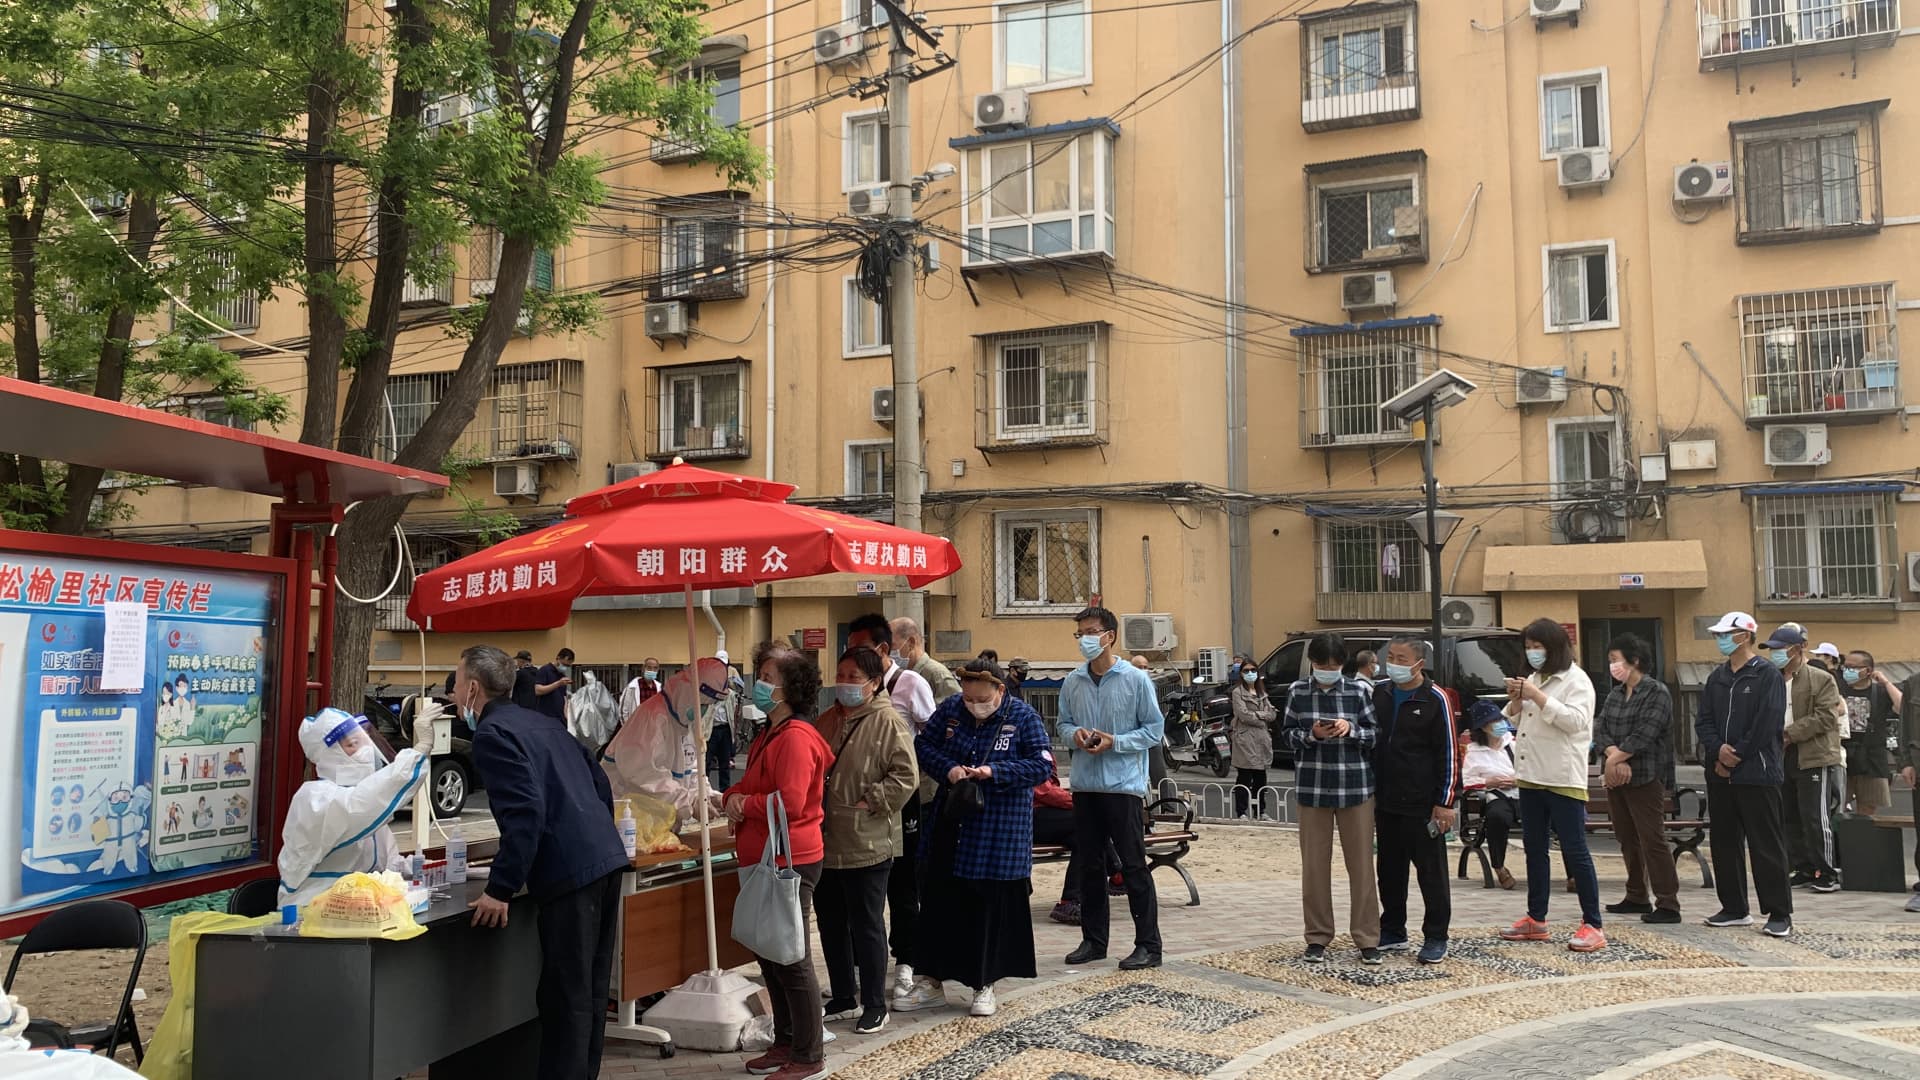 China's capital city of Beijing reported a spike in Covid cases over the weekend and began mass testing Monday in the business district of Chaoyang. Within the district, one community that's pictured here became classified as a high-risk area.